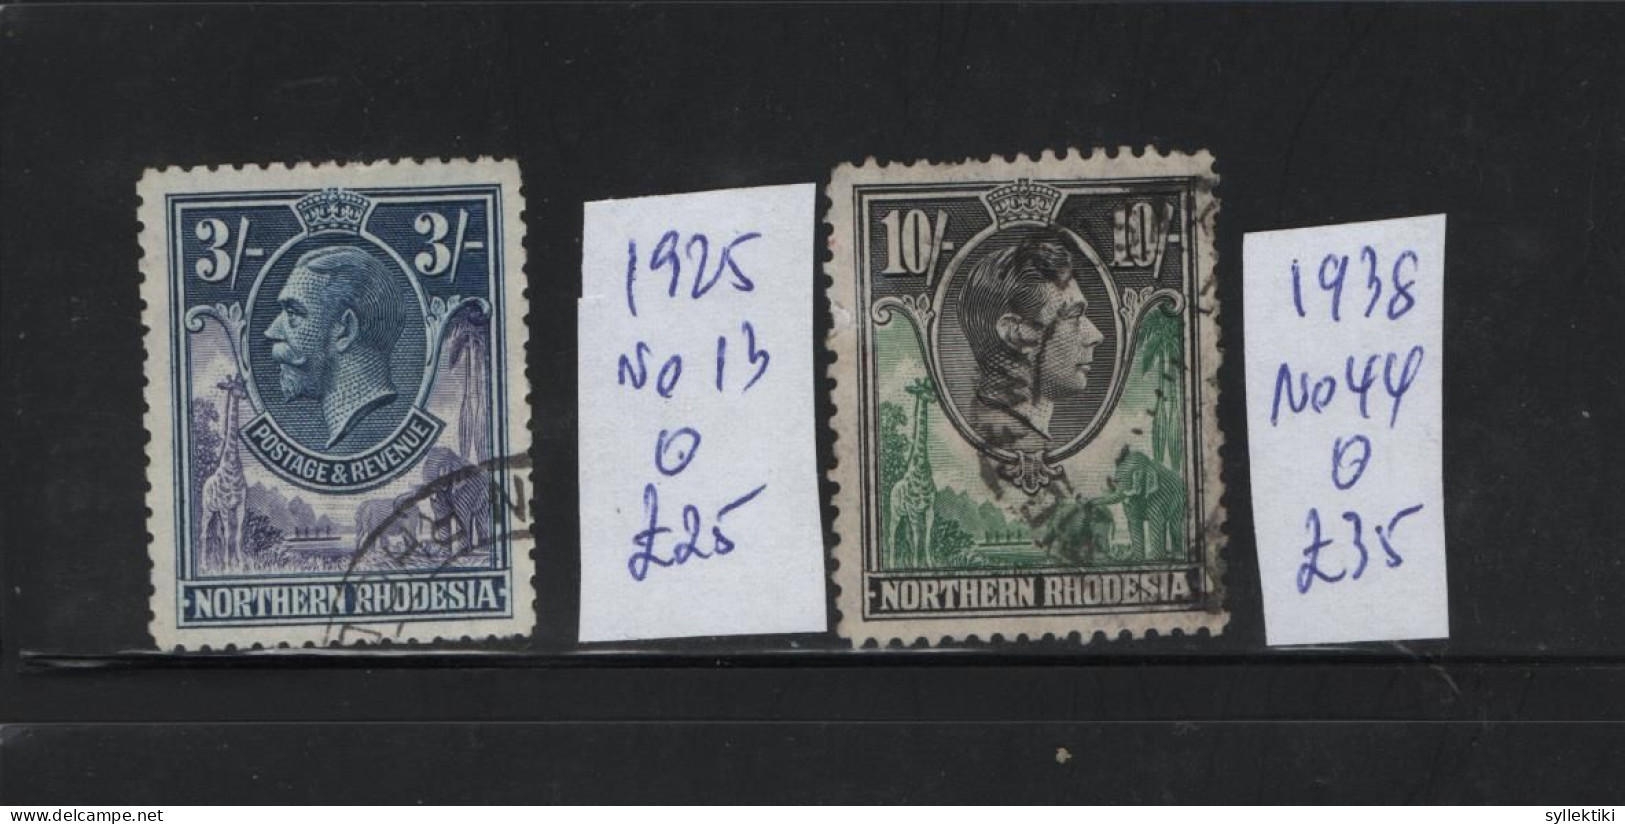 NORTHERN RHODESIA 1925/38 BRITISH COLONY 2 USED STAMPS   STANLEY GIBBONS No 13 & 44 AND VALUE GBP 60.00 - Northern Rhodesia (...-1963)